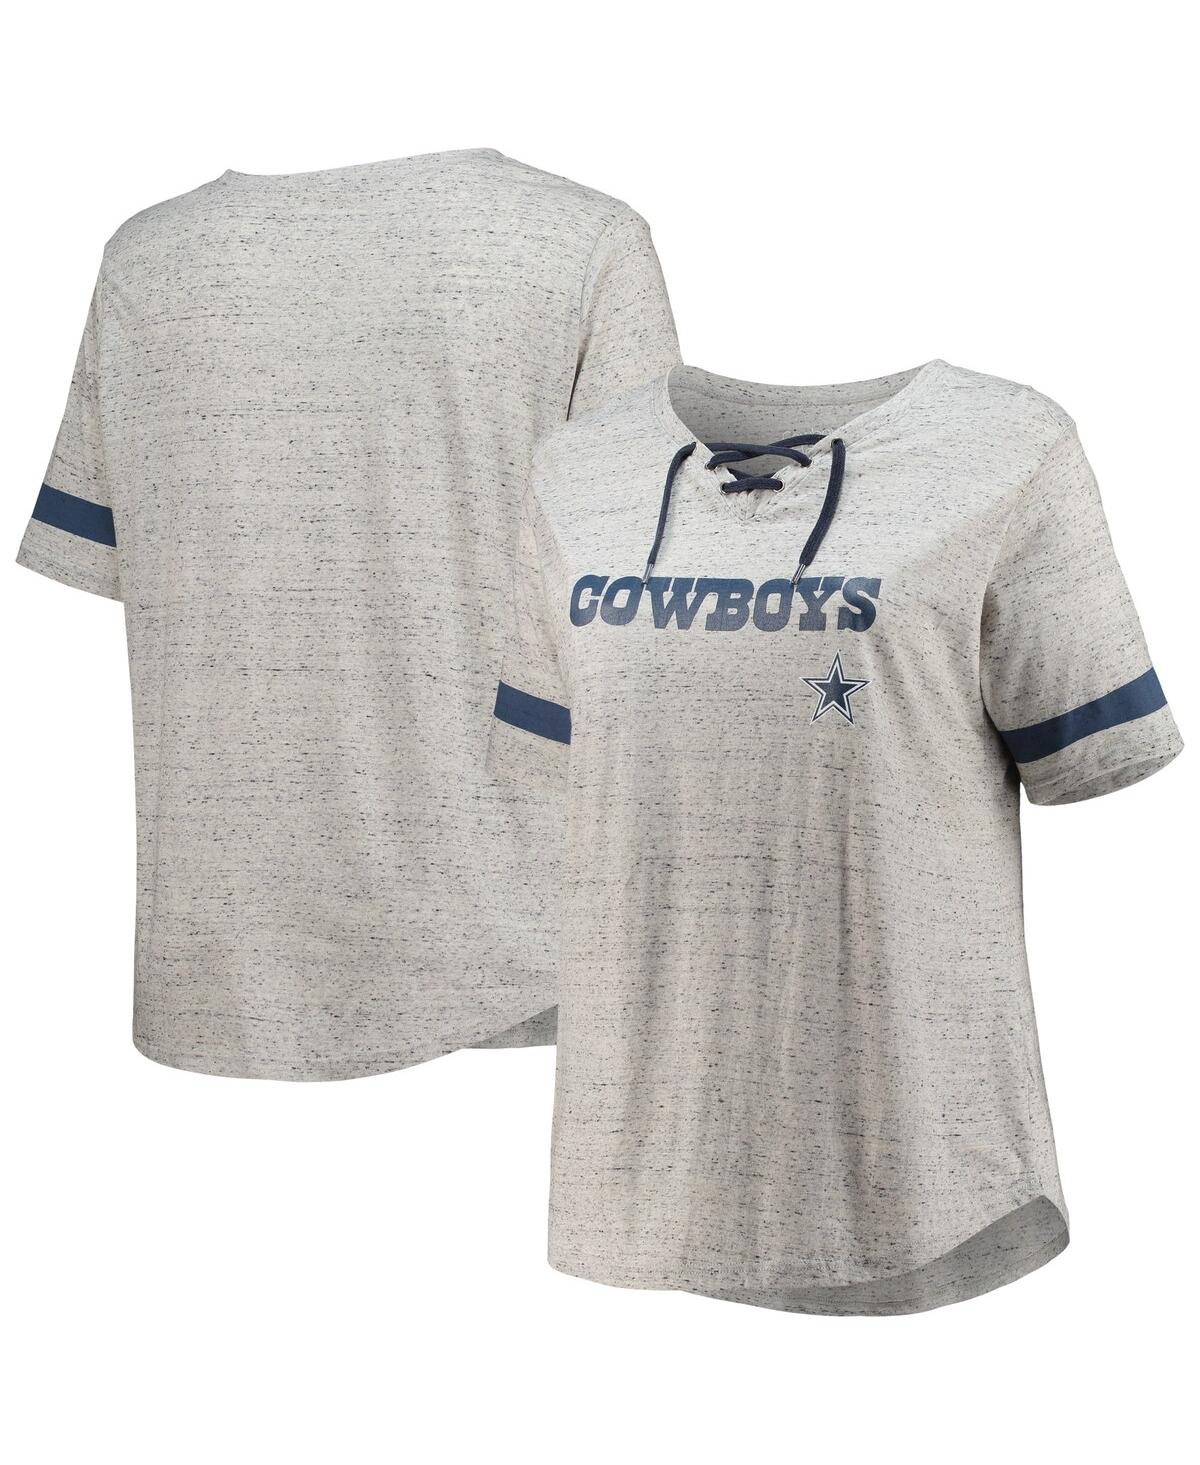 Women's Heathered Gray Dallas Cowboys Plus Size Lace-Up V-Neck T-shirt - Heather Gray, Navy